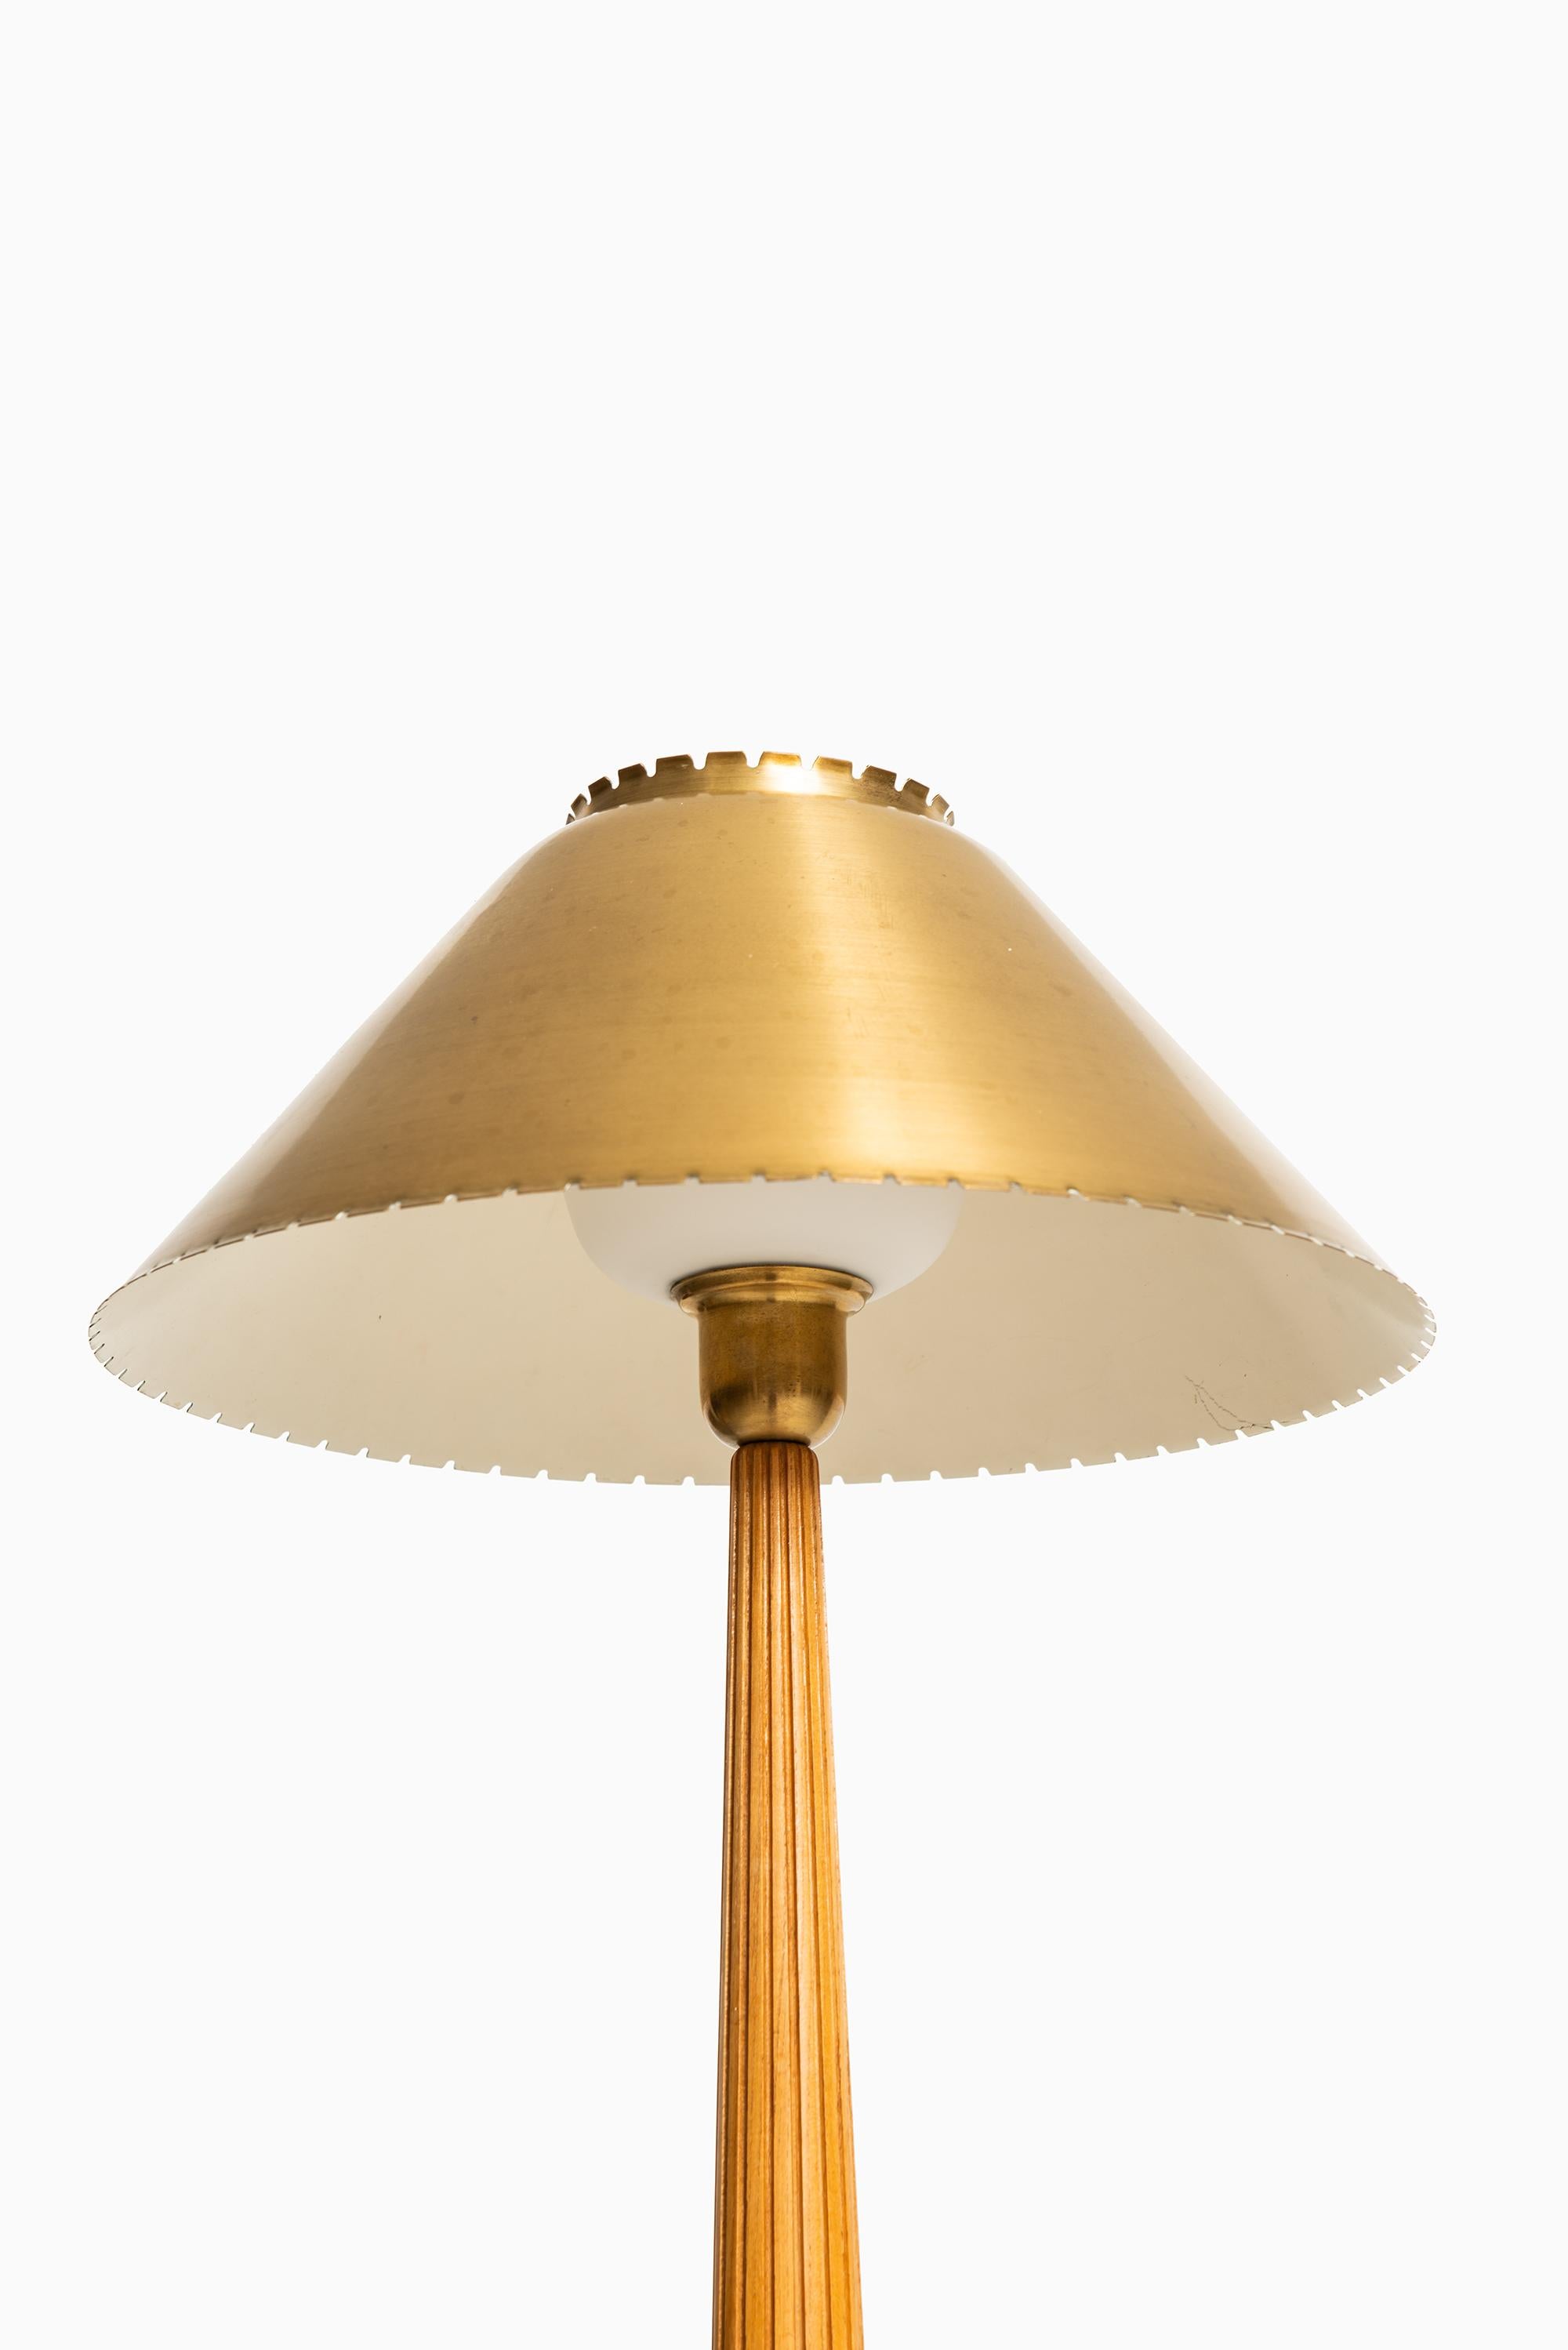 Swedish Hans Bergström Table Lamp Produced by ASEA in Sweden For Sale